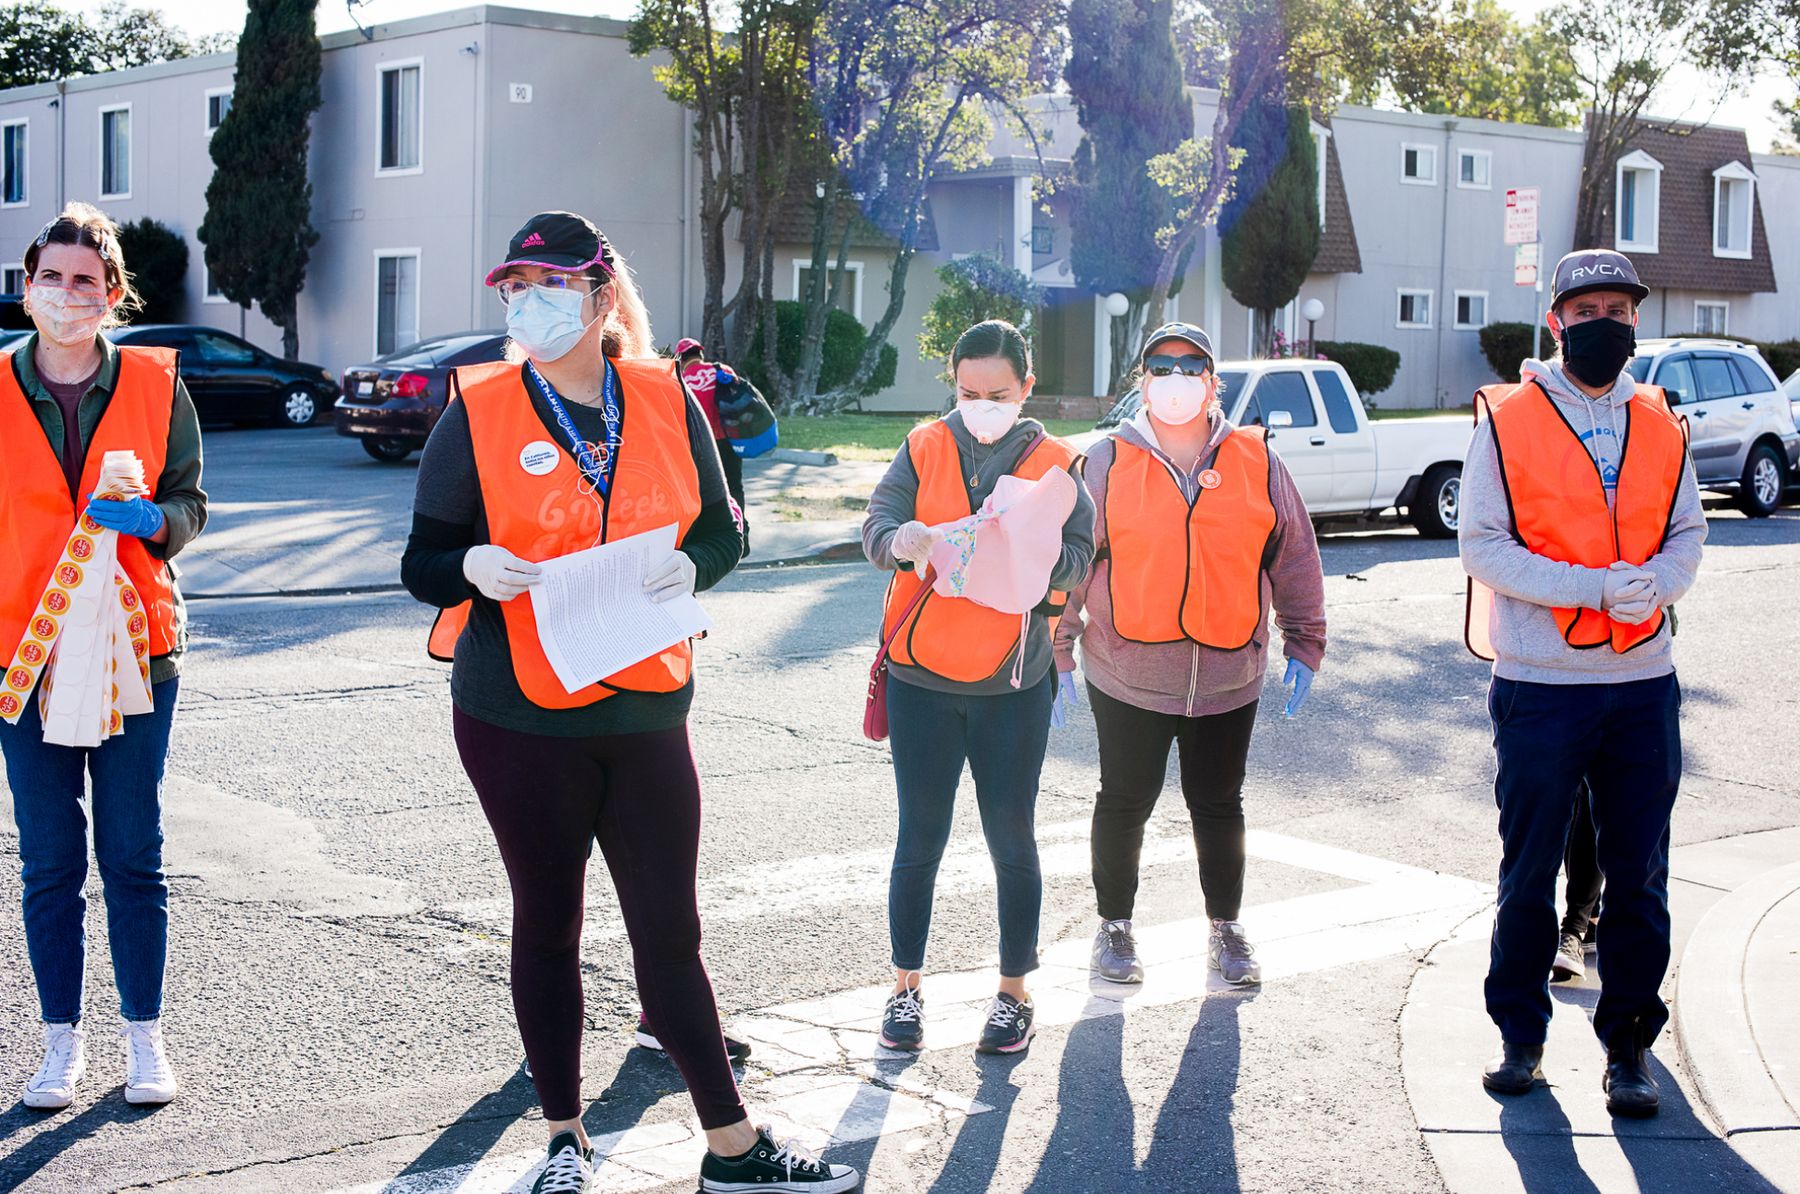 A group of people wearing orange safety vests, masks, and gloves stand on a city street on a sunny day.